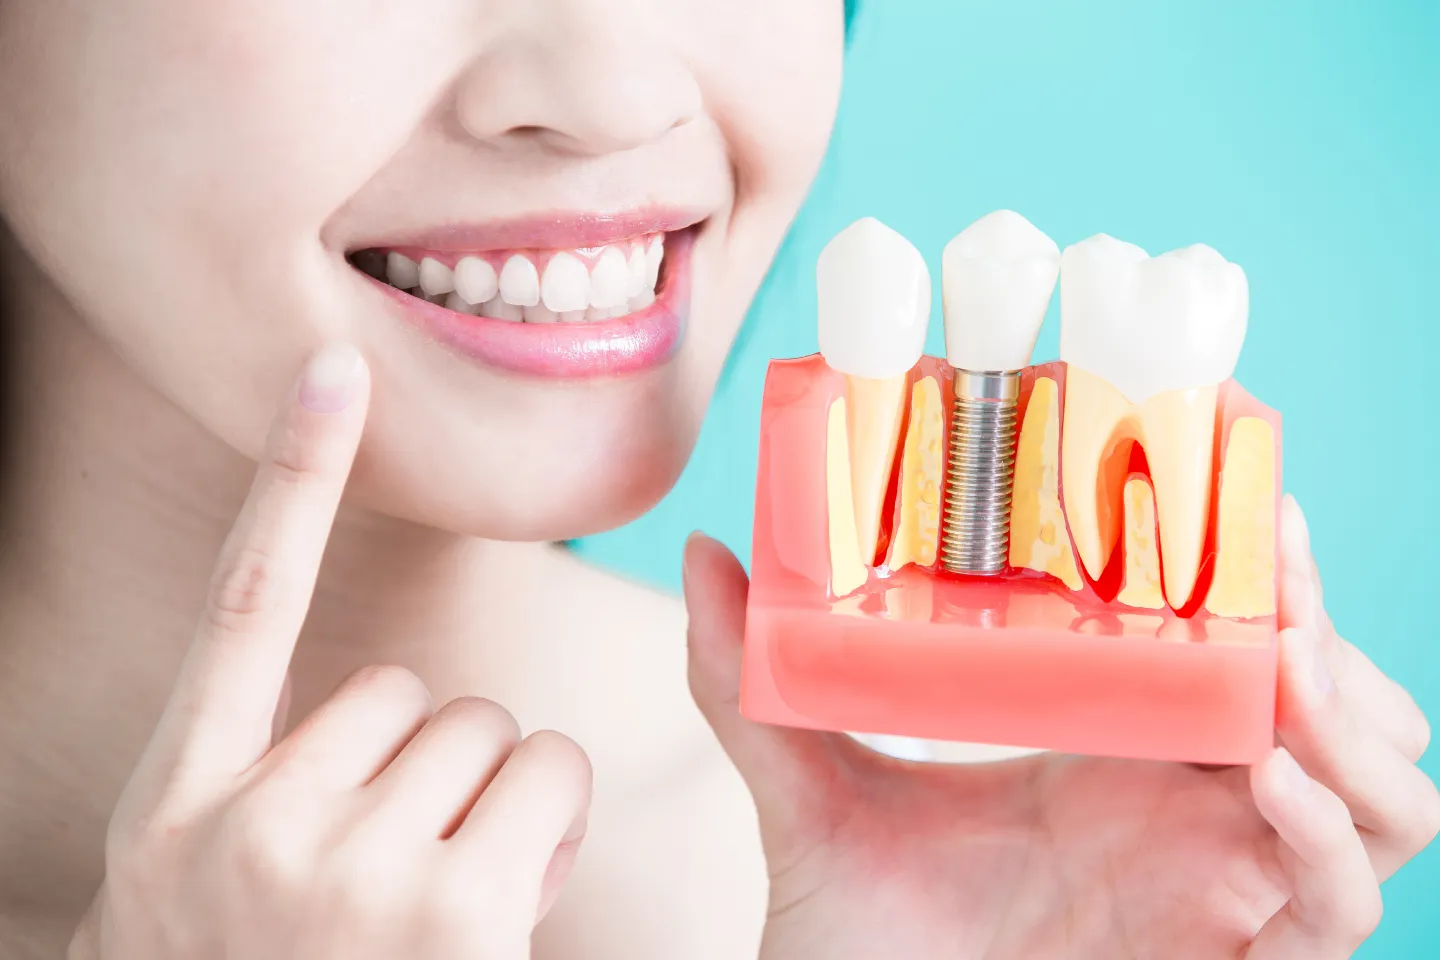  Dental implants consultation with Dr. Isaac Menasha at IM Dentistry, the best dentist in New Jersey